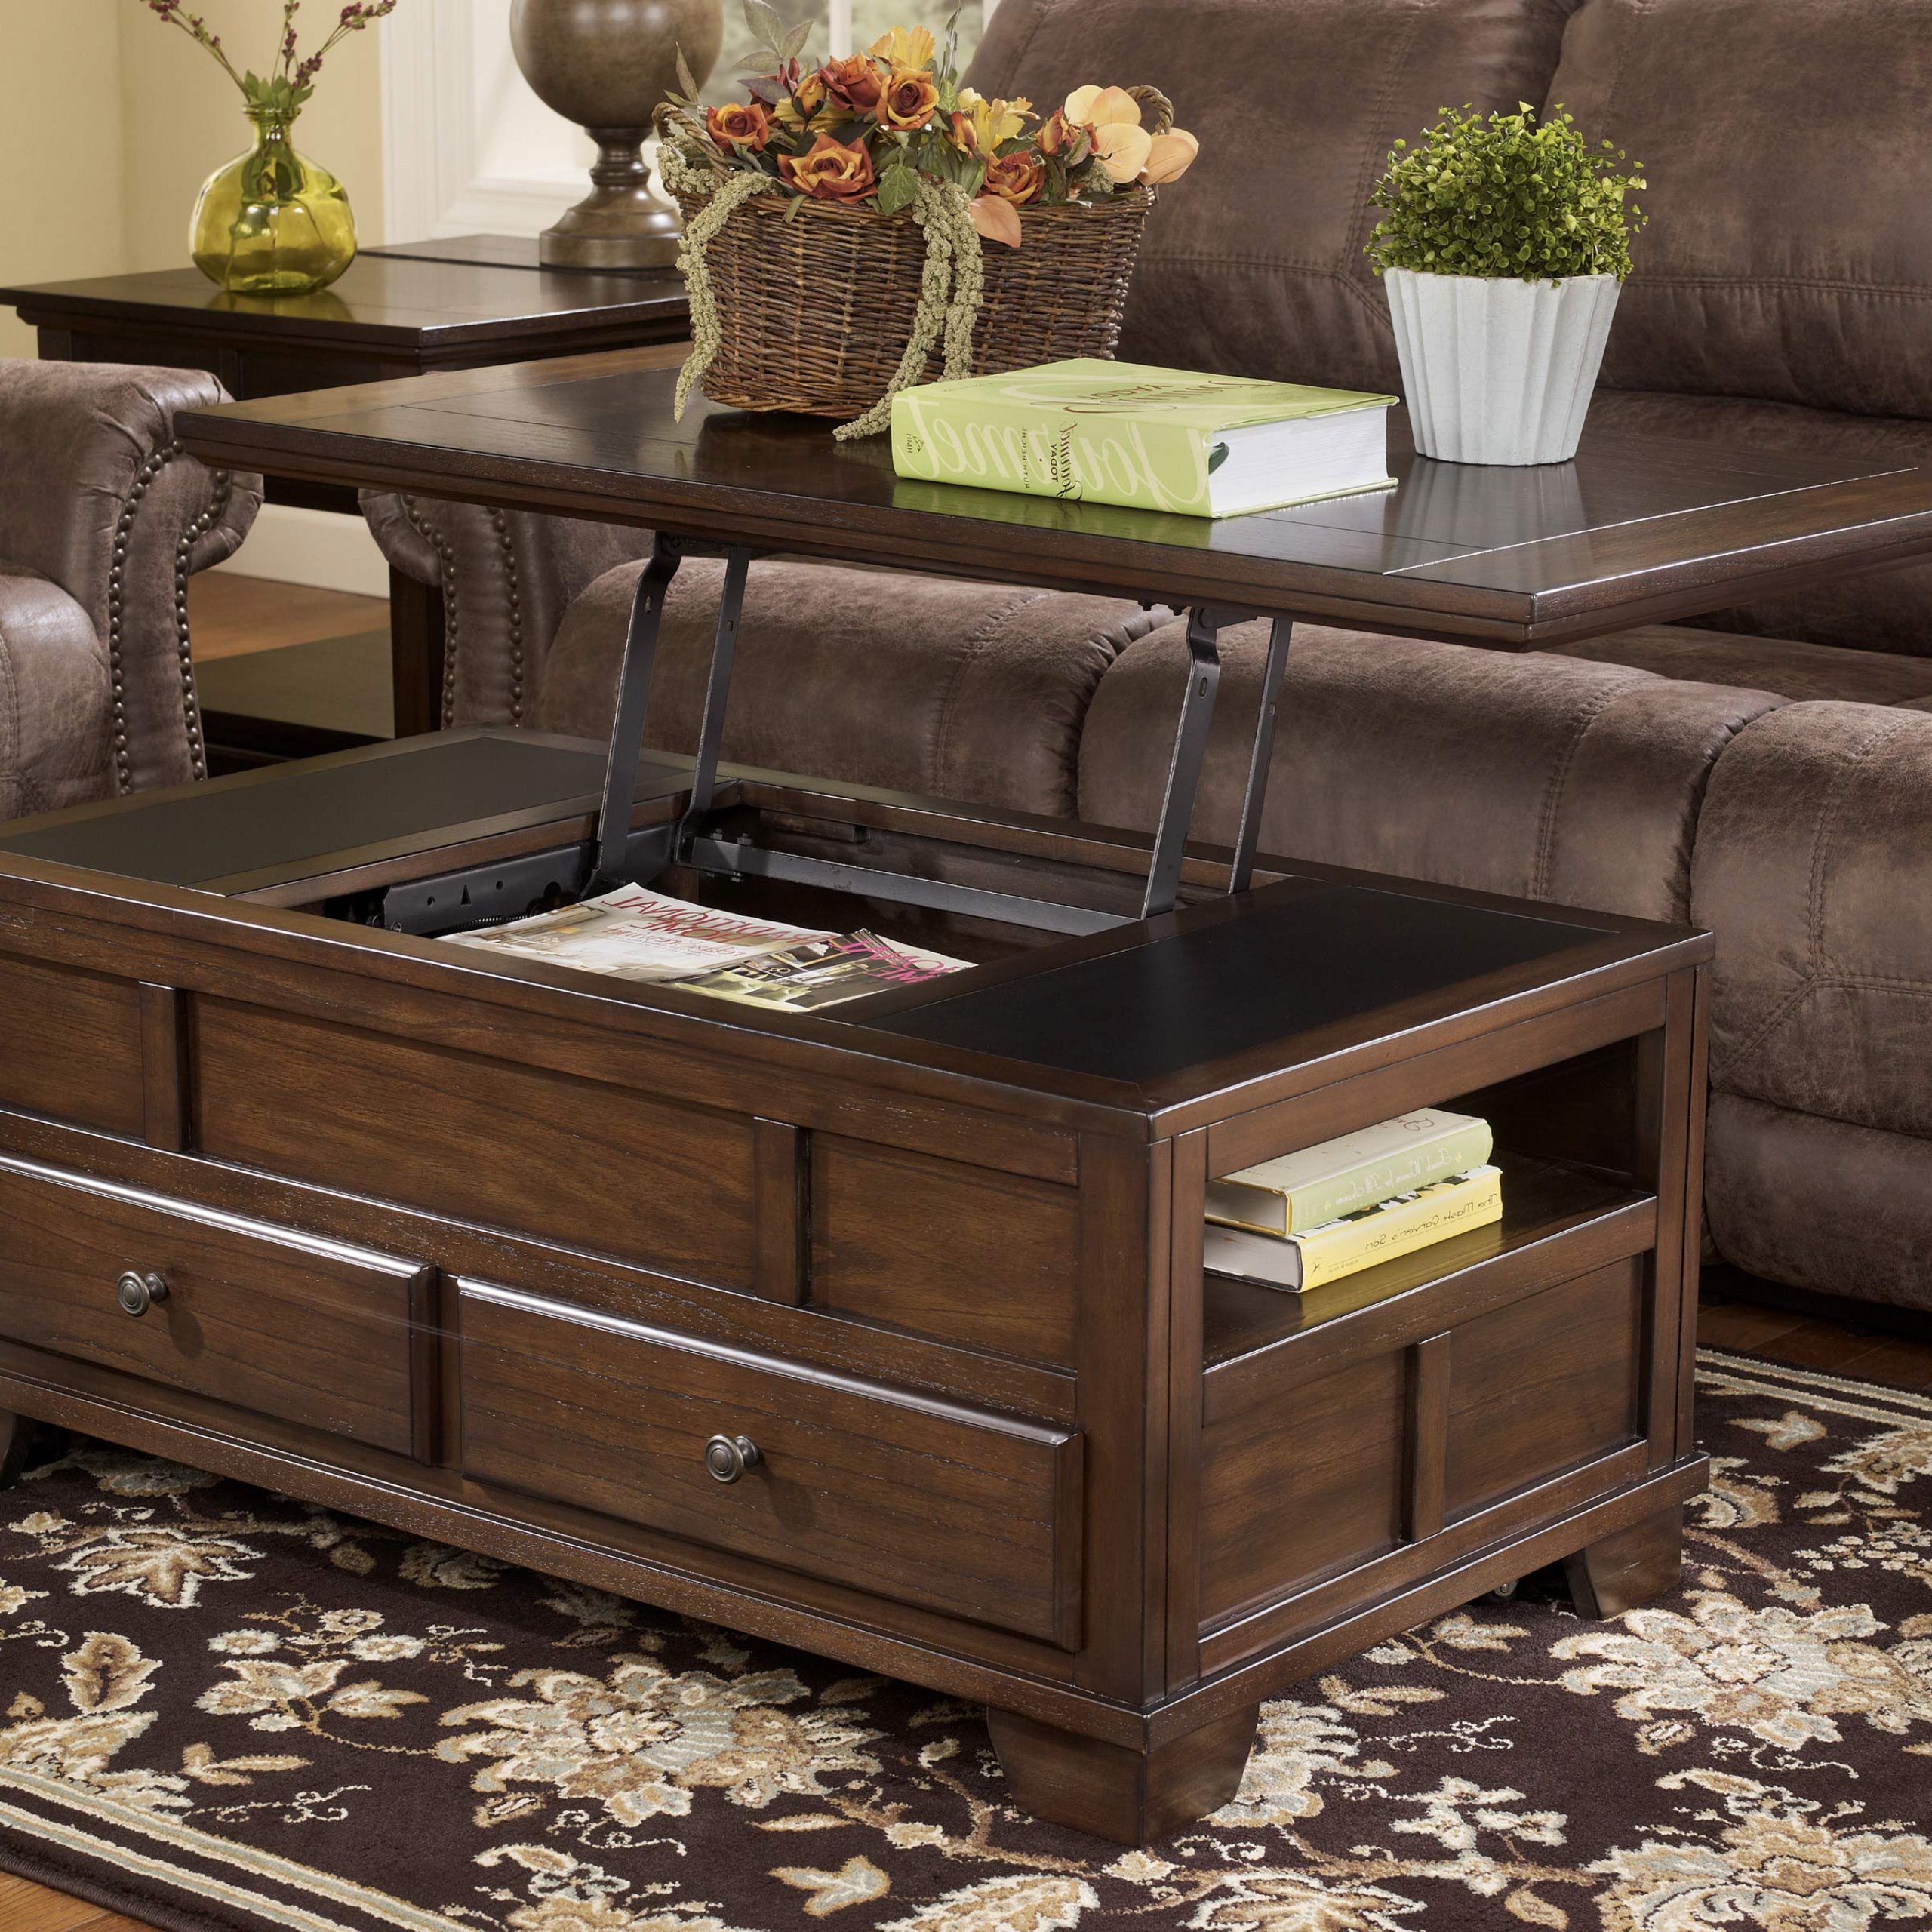 Lift Top Coffee Tables With Storage With Coffee Tables With Storage (View 12 of 15)